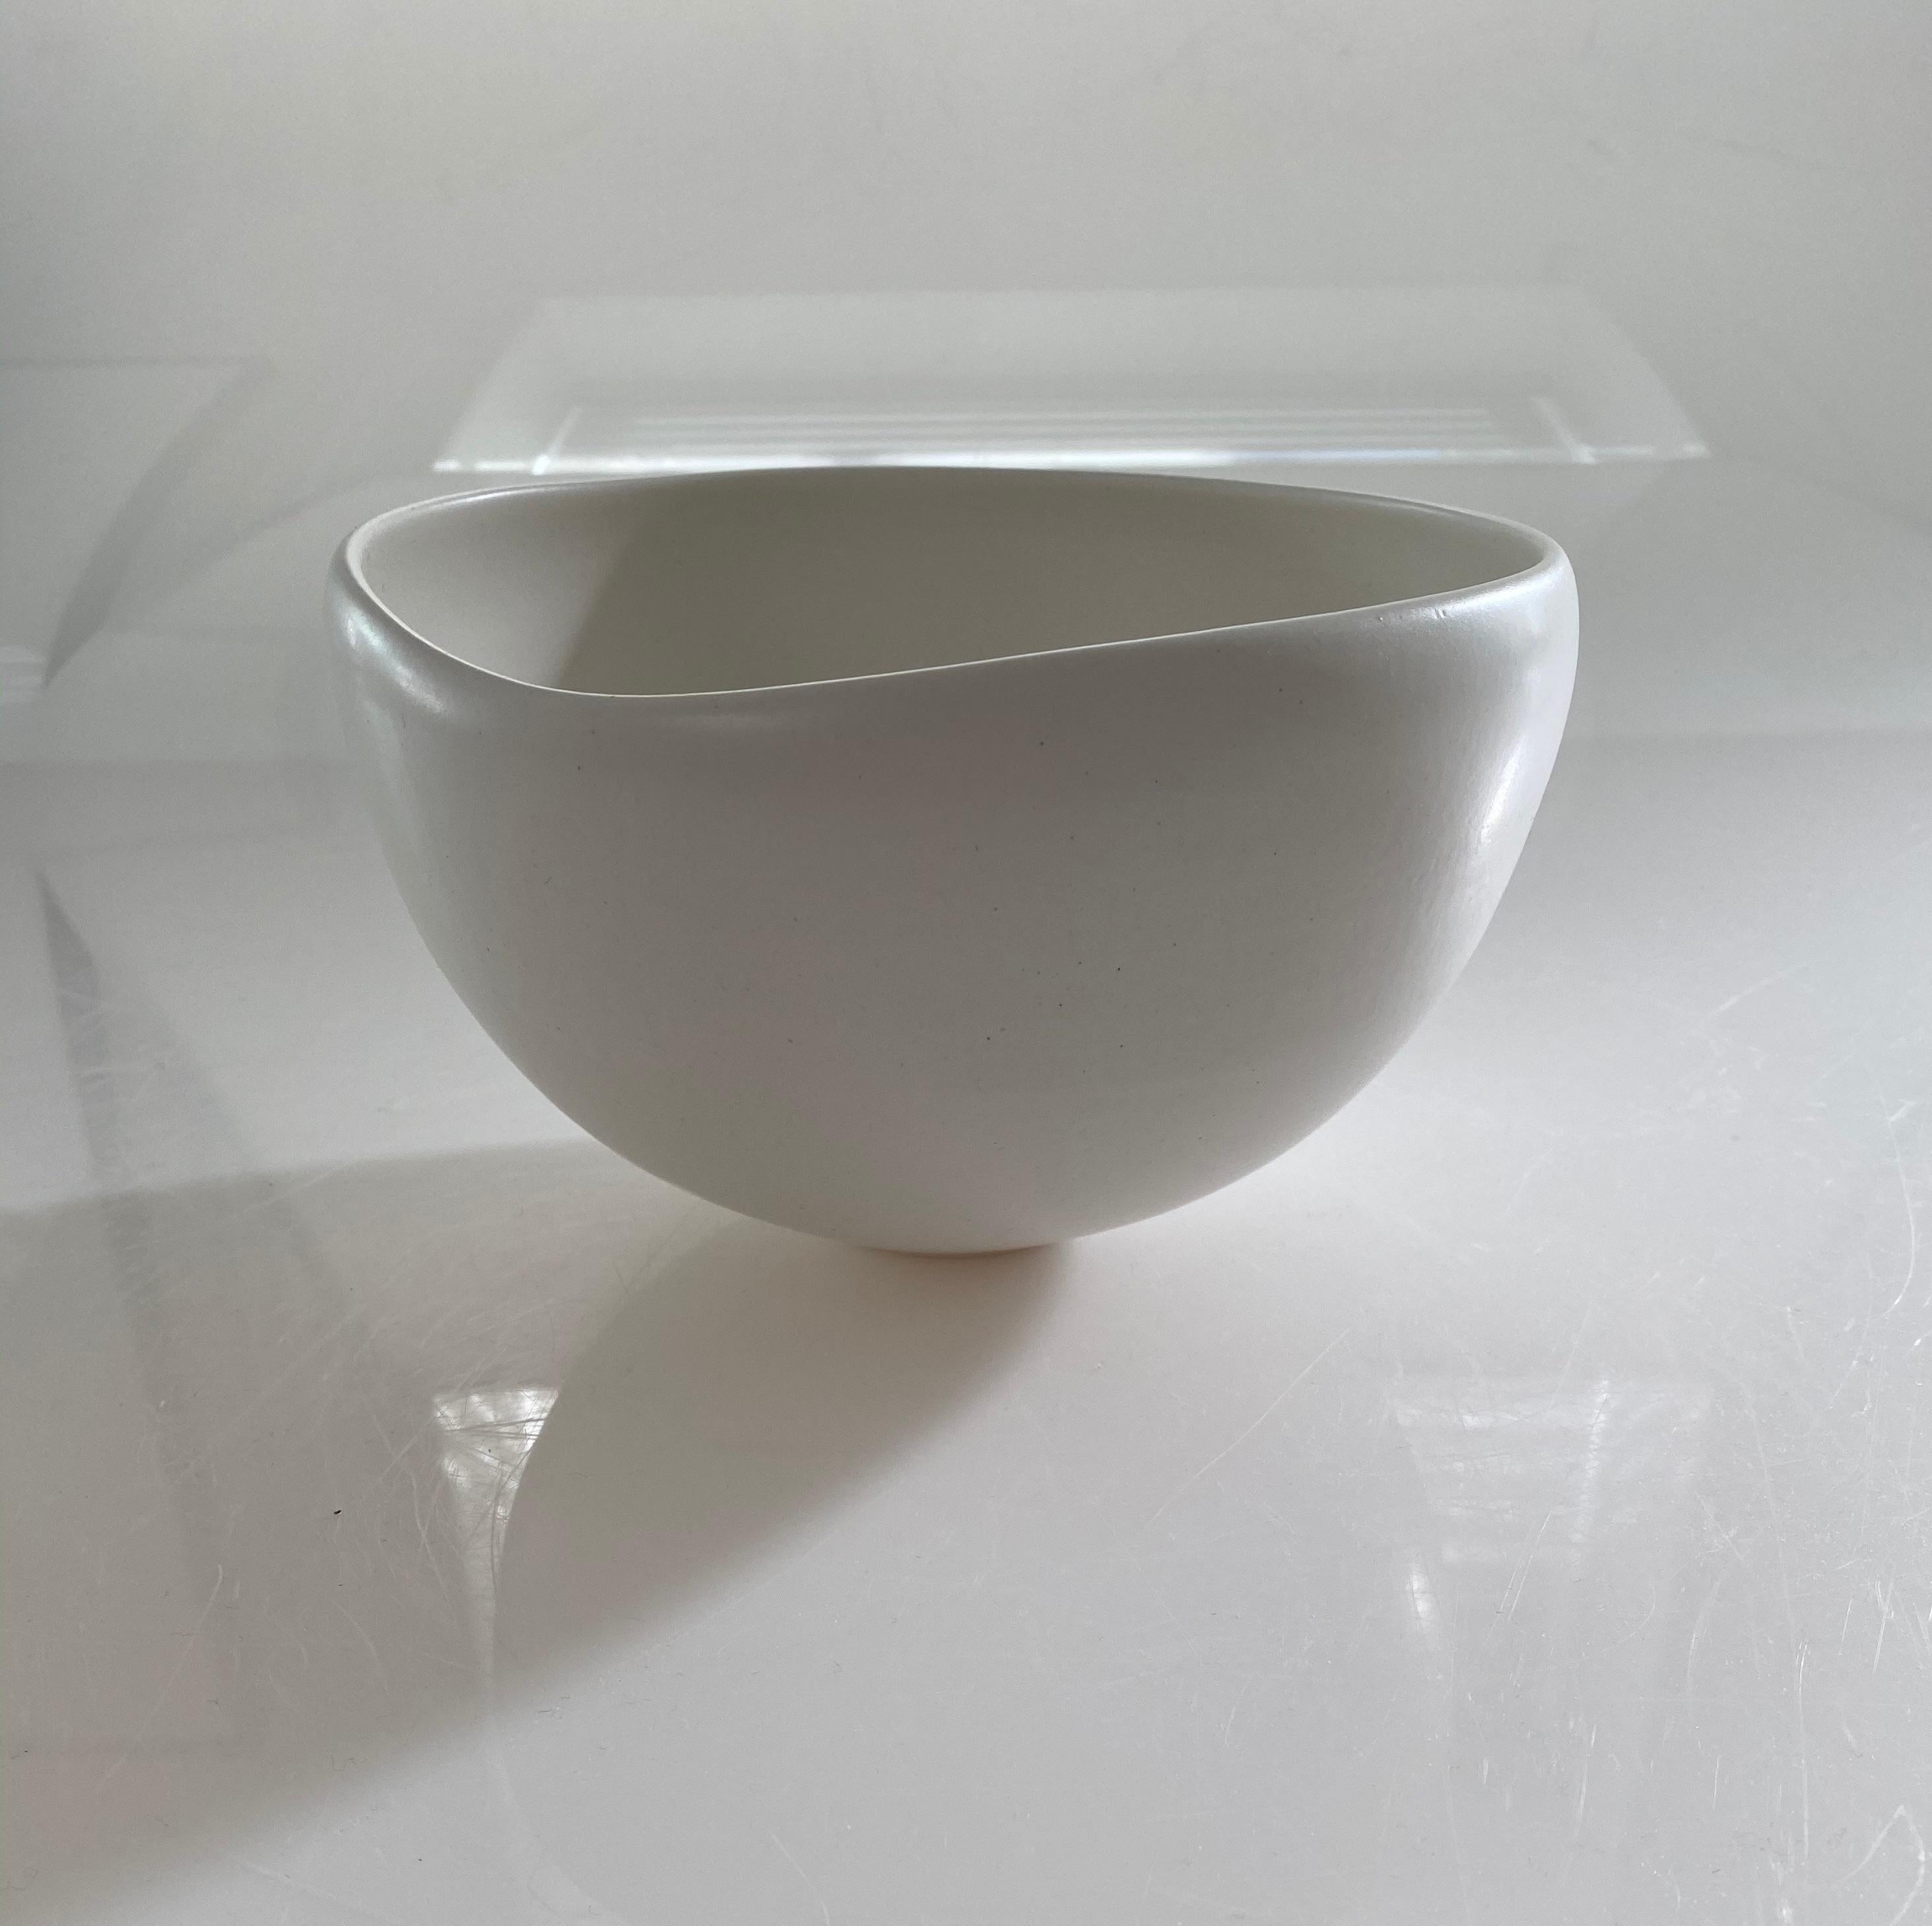 Spouted bowl porcelain vase with alabaster glaze
Can hold water
One of several pieces from a large collection
Veteran photographer Sandi Fellman's ceramic vessels are an exploration of a new medium.The forms, palettes, and sensuality of her